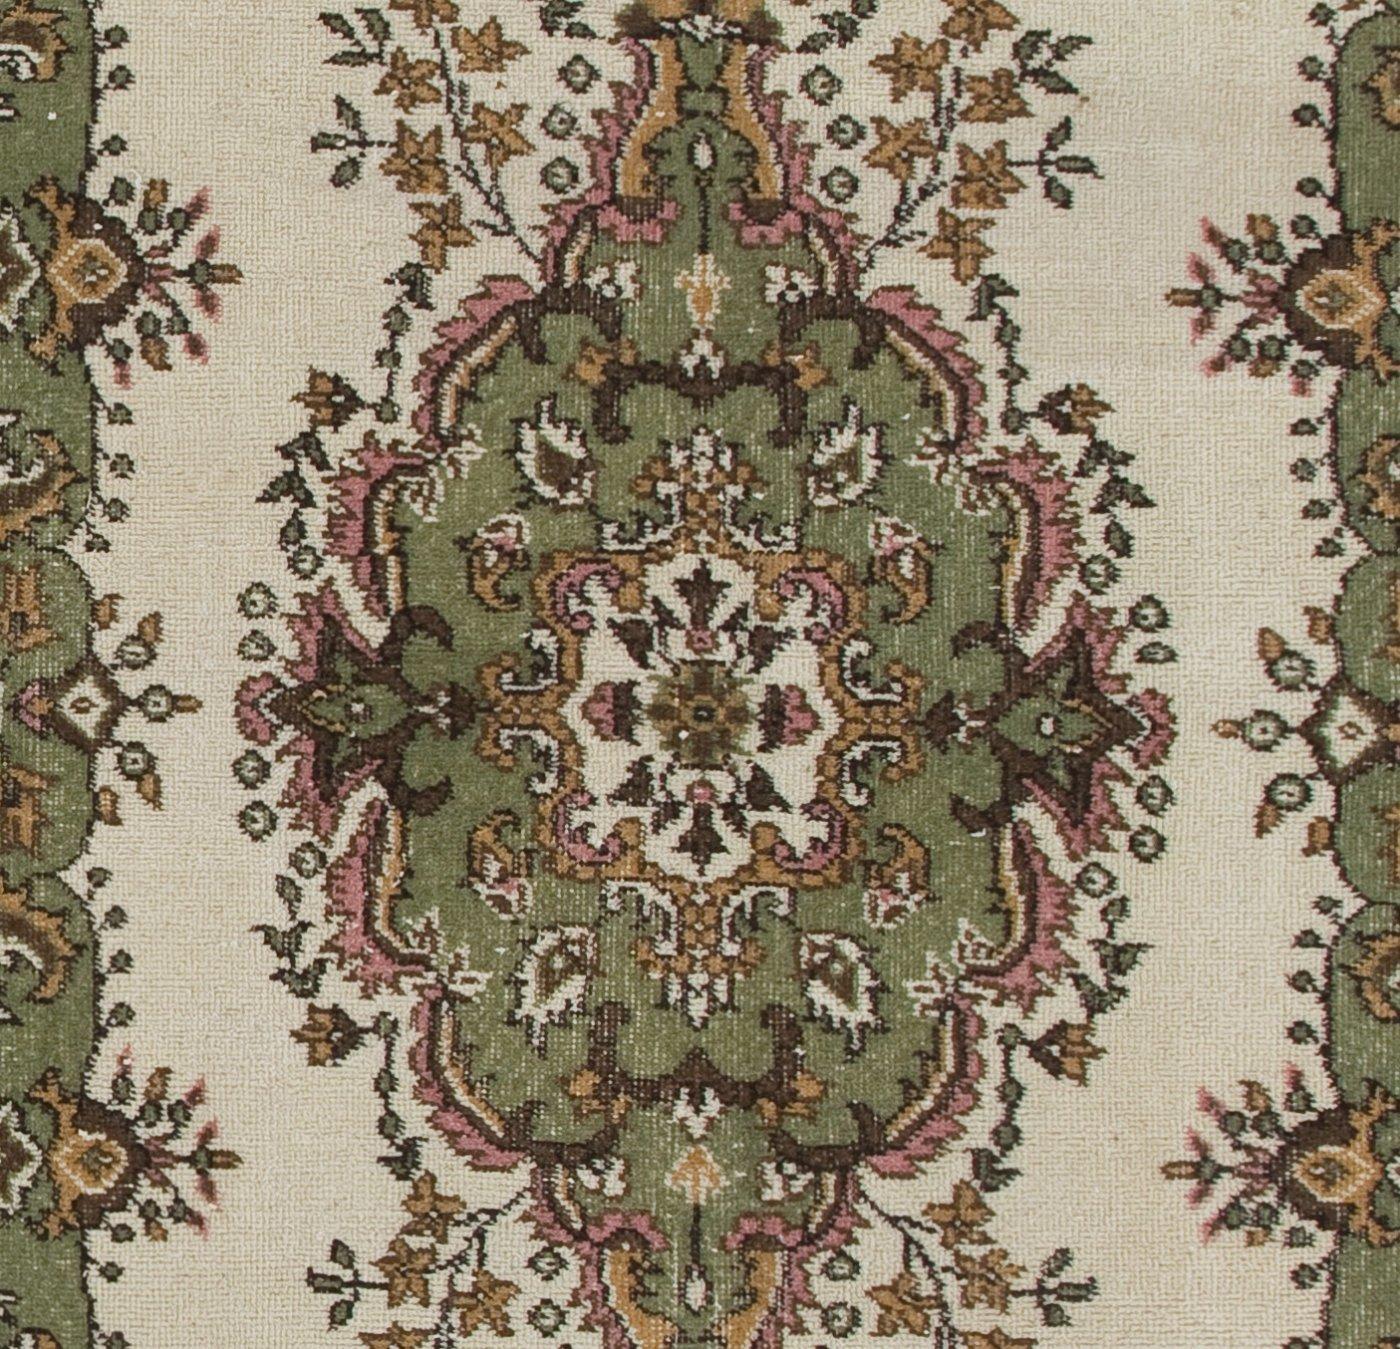 Hand-Knotted 4x7 Ft Handmade Vintage Oushak Accent Rug in Beige, Green, Pink & Orange Colors For Sale